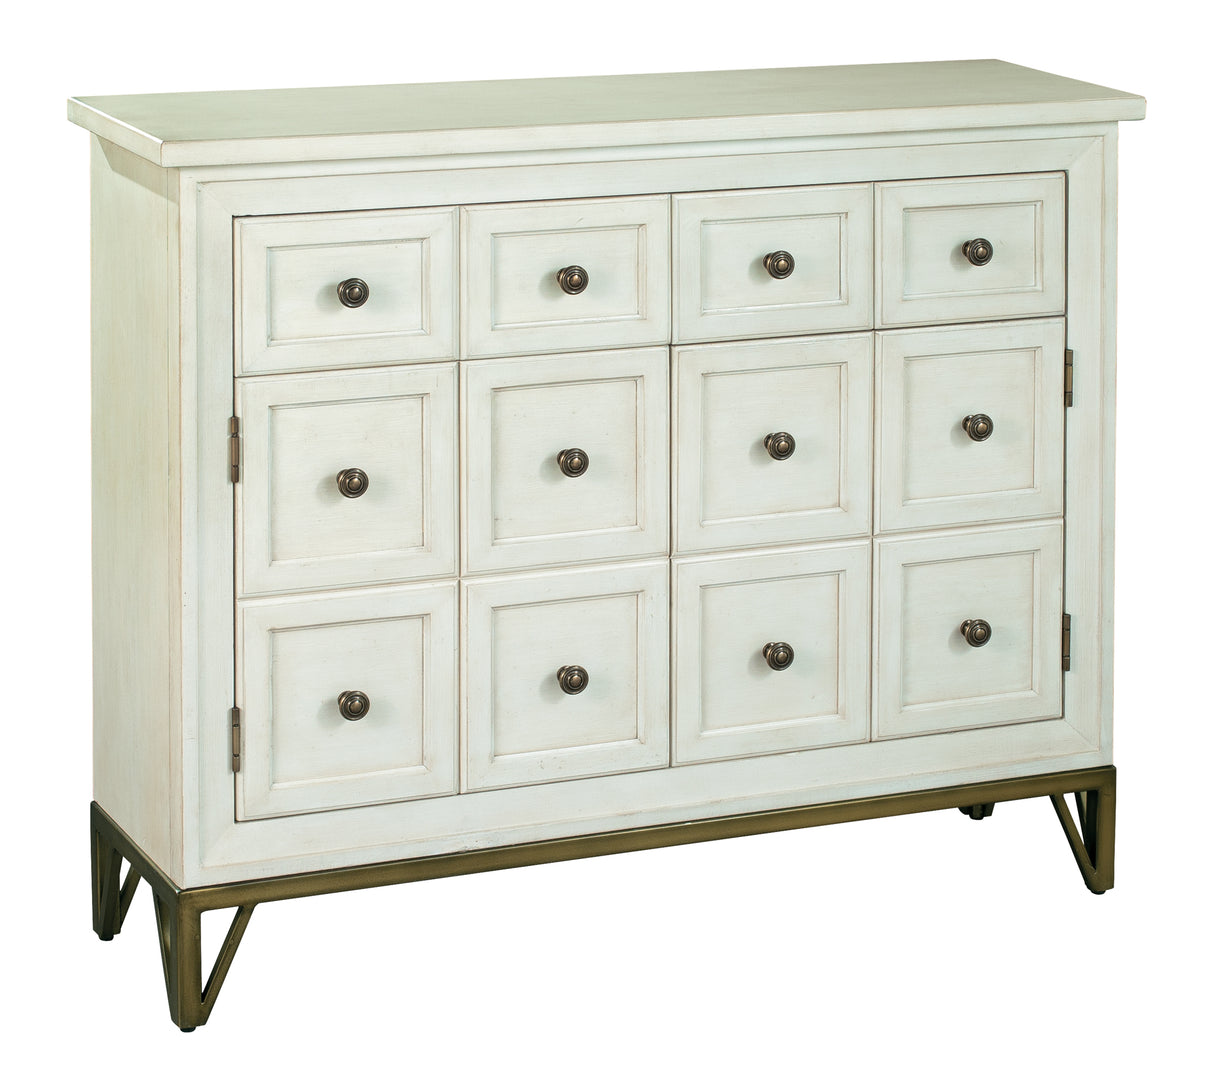 Hekman 28174 Accents 42.5in. x 12in. x 38.25in. Apothecary Chest